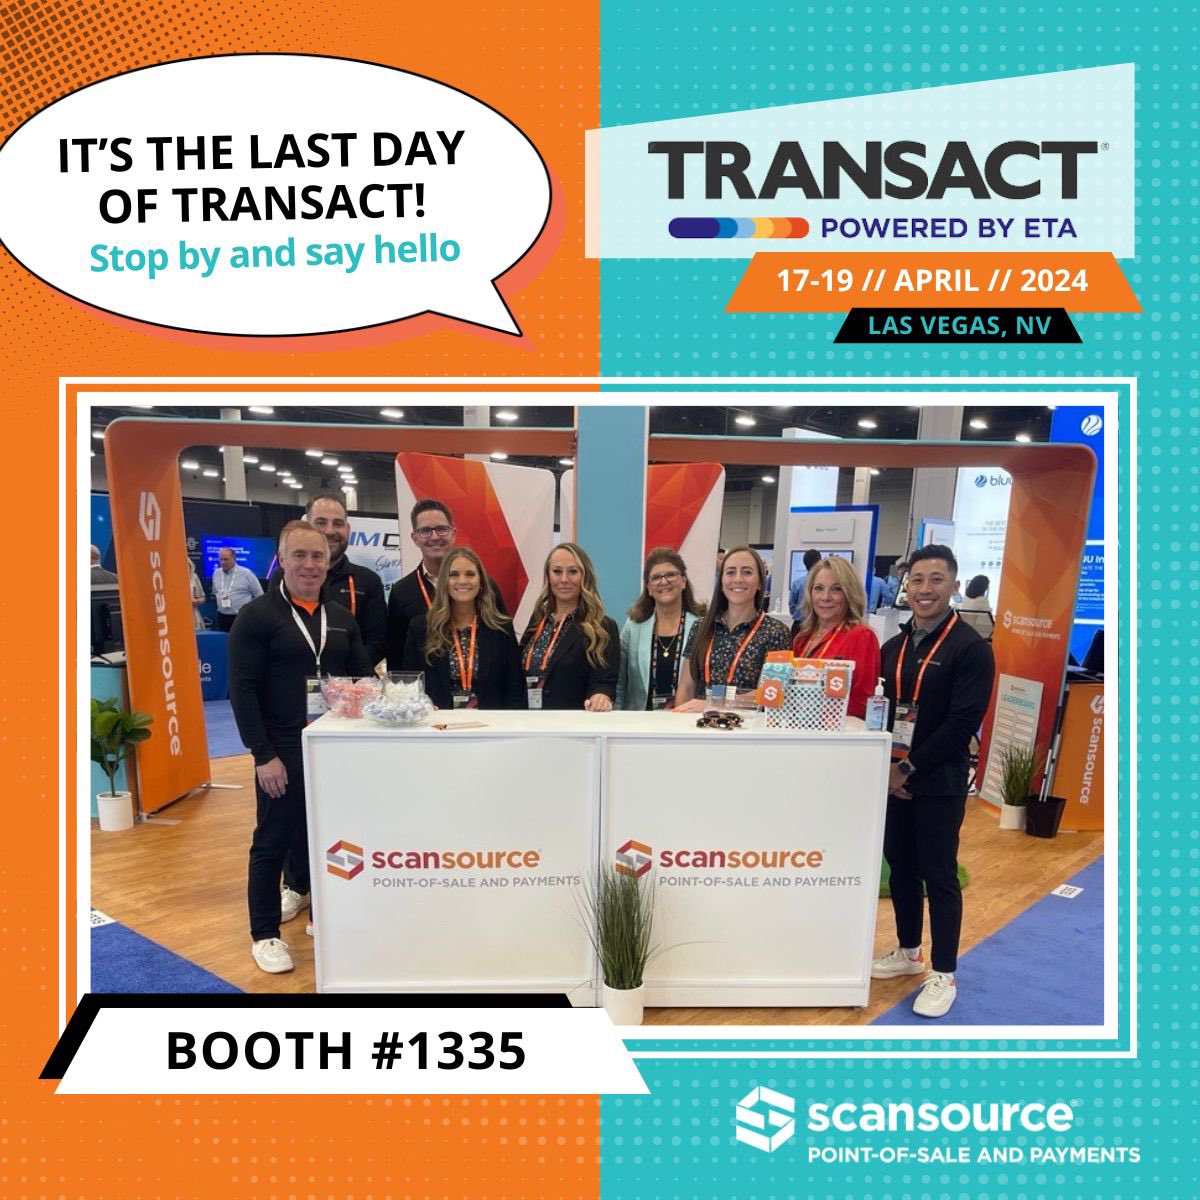 ✨It's the last day of #ETATRANSACT! Stop by our booth #1335 for another day of opportunities, networking, and inspiration. See you soon!✨🎉